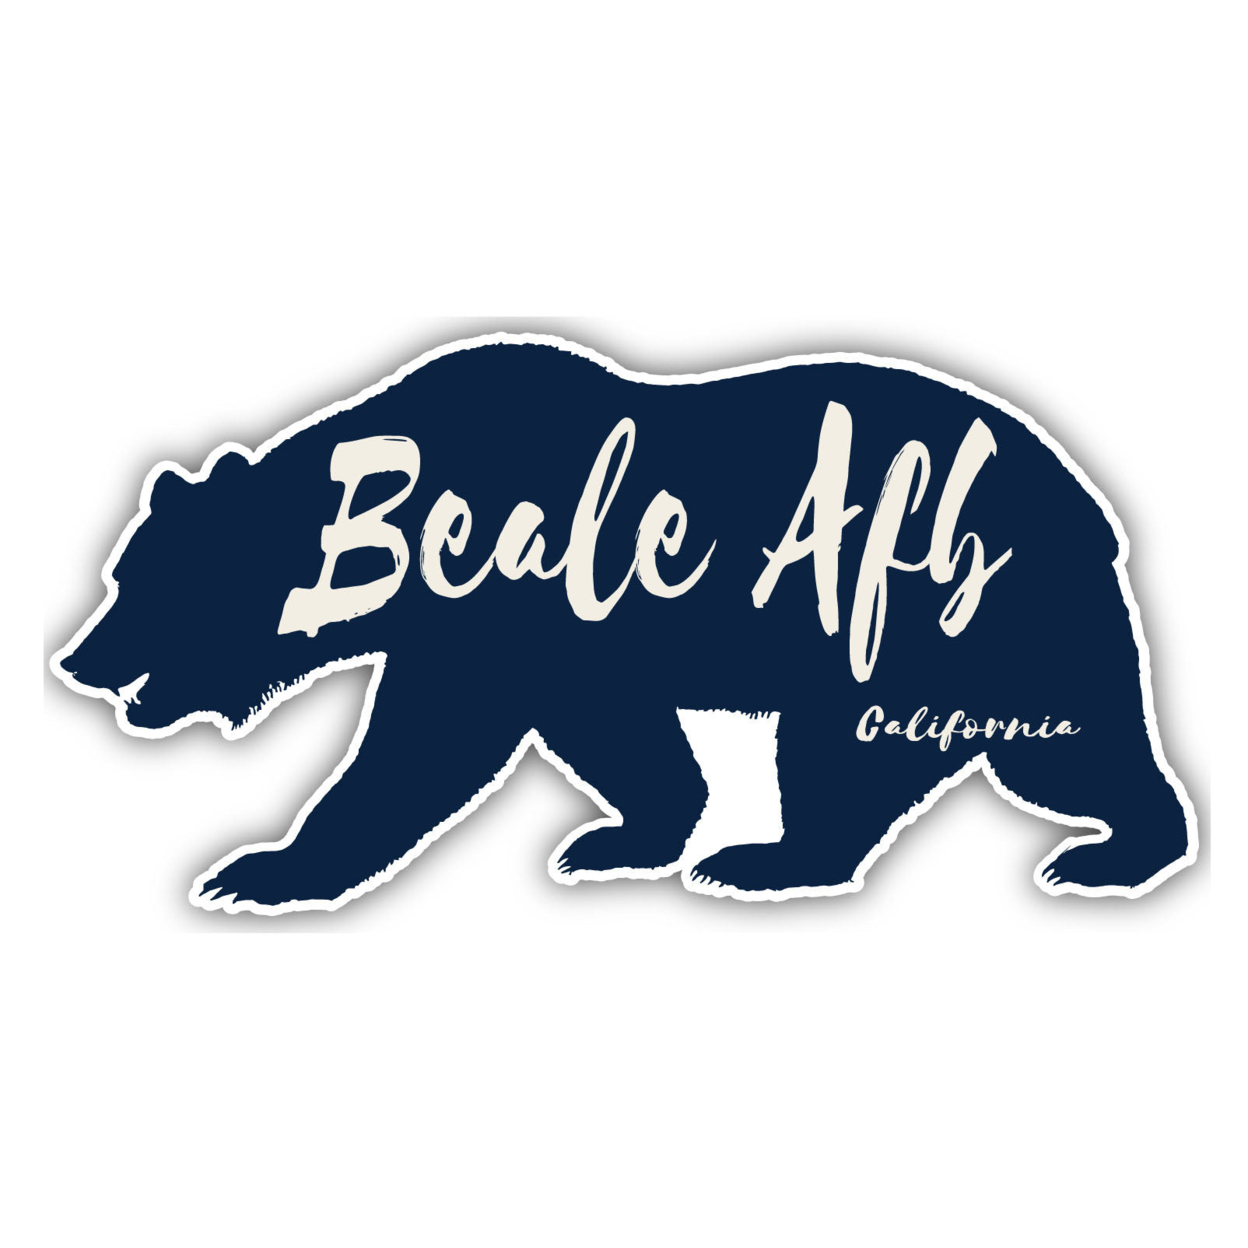 Beale AFB California Souvenir Decorative Stickers (Choose Theme And Size) - 4-Pack, 10-Inch, Bear